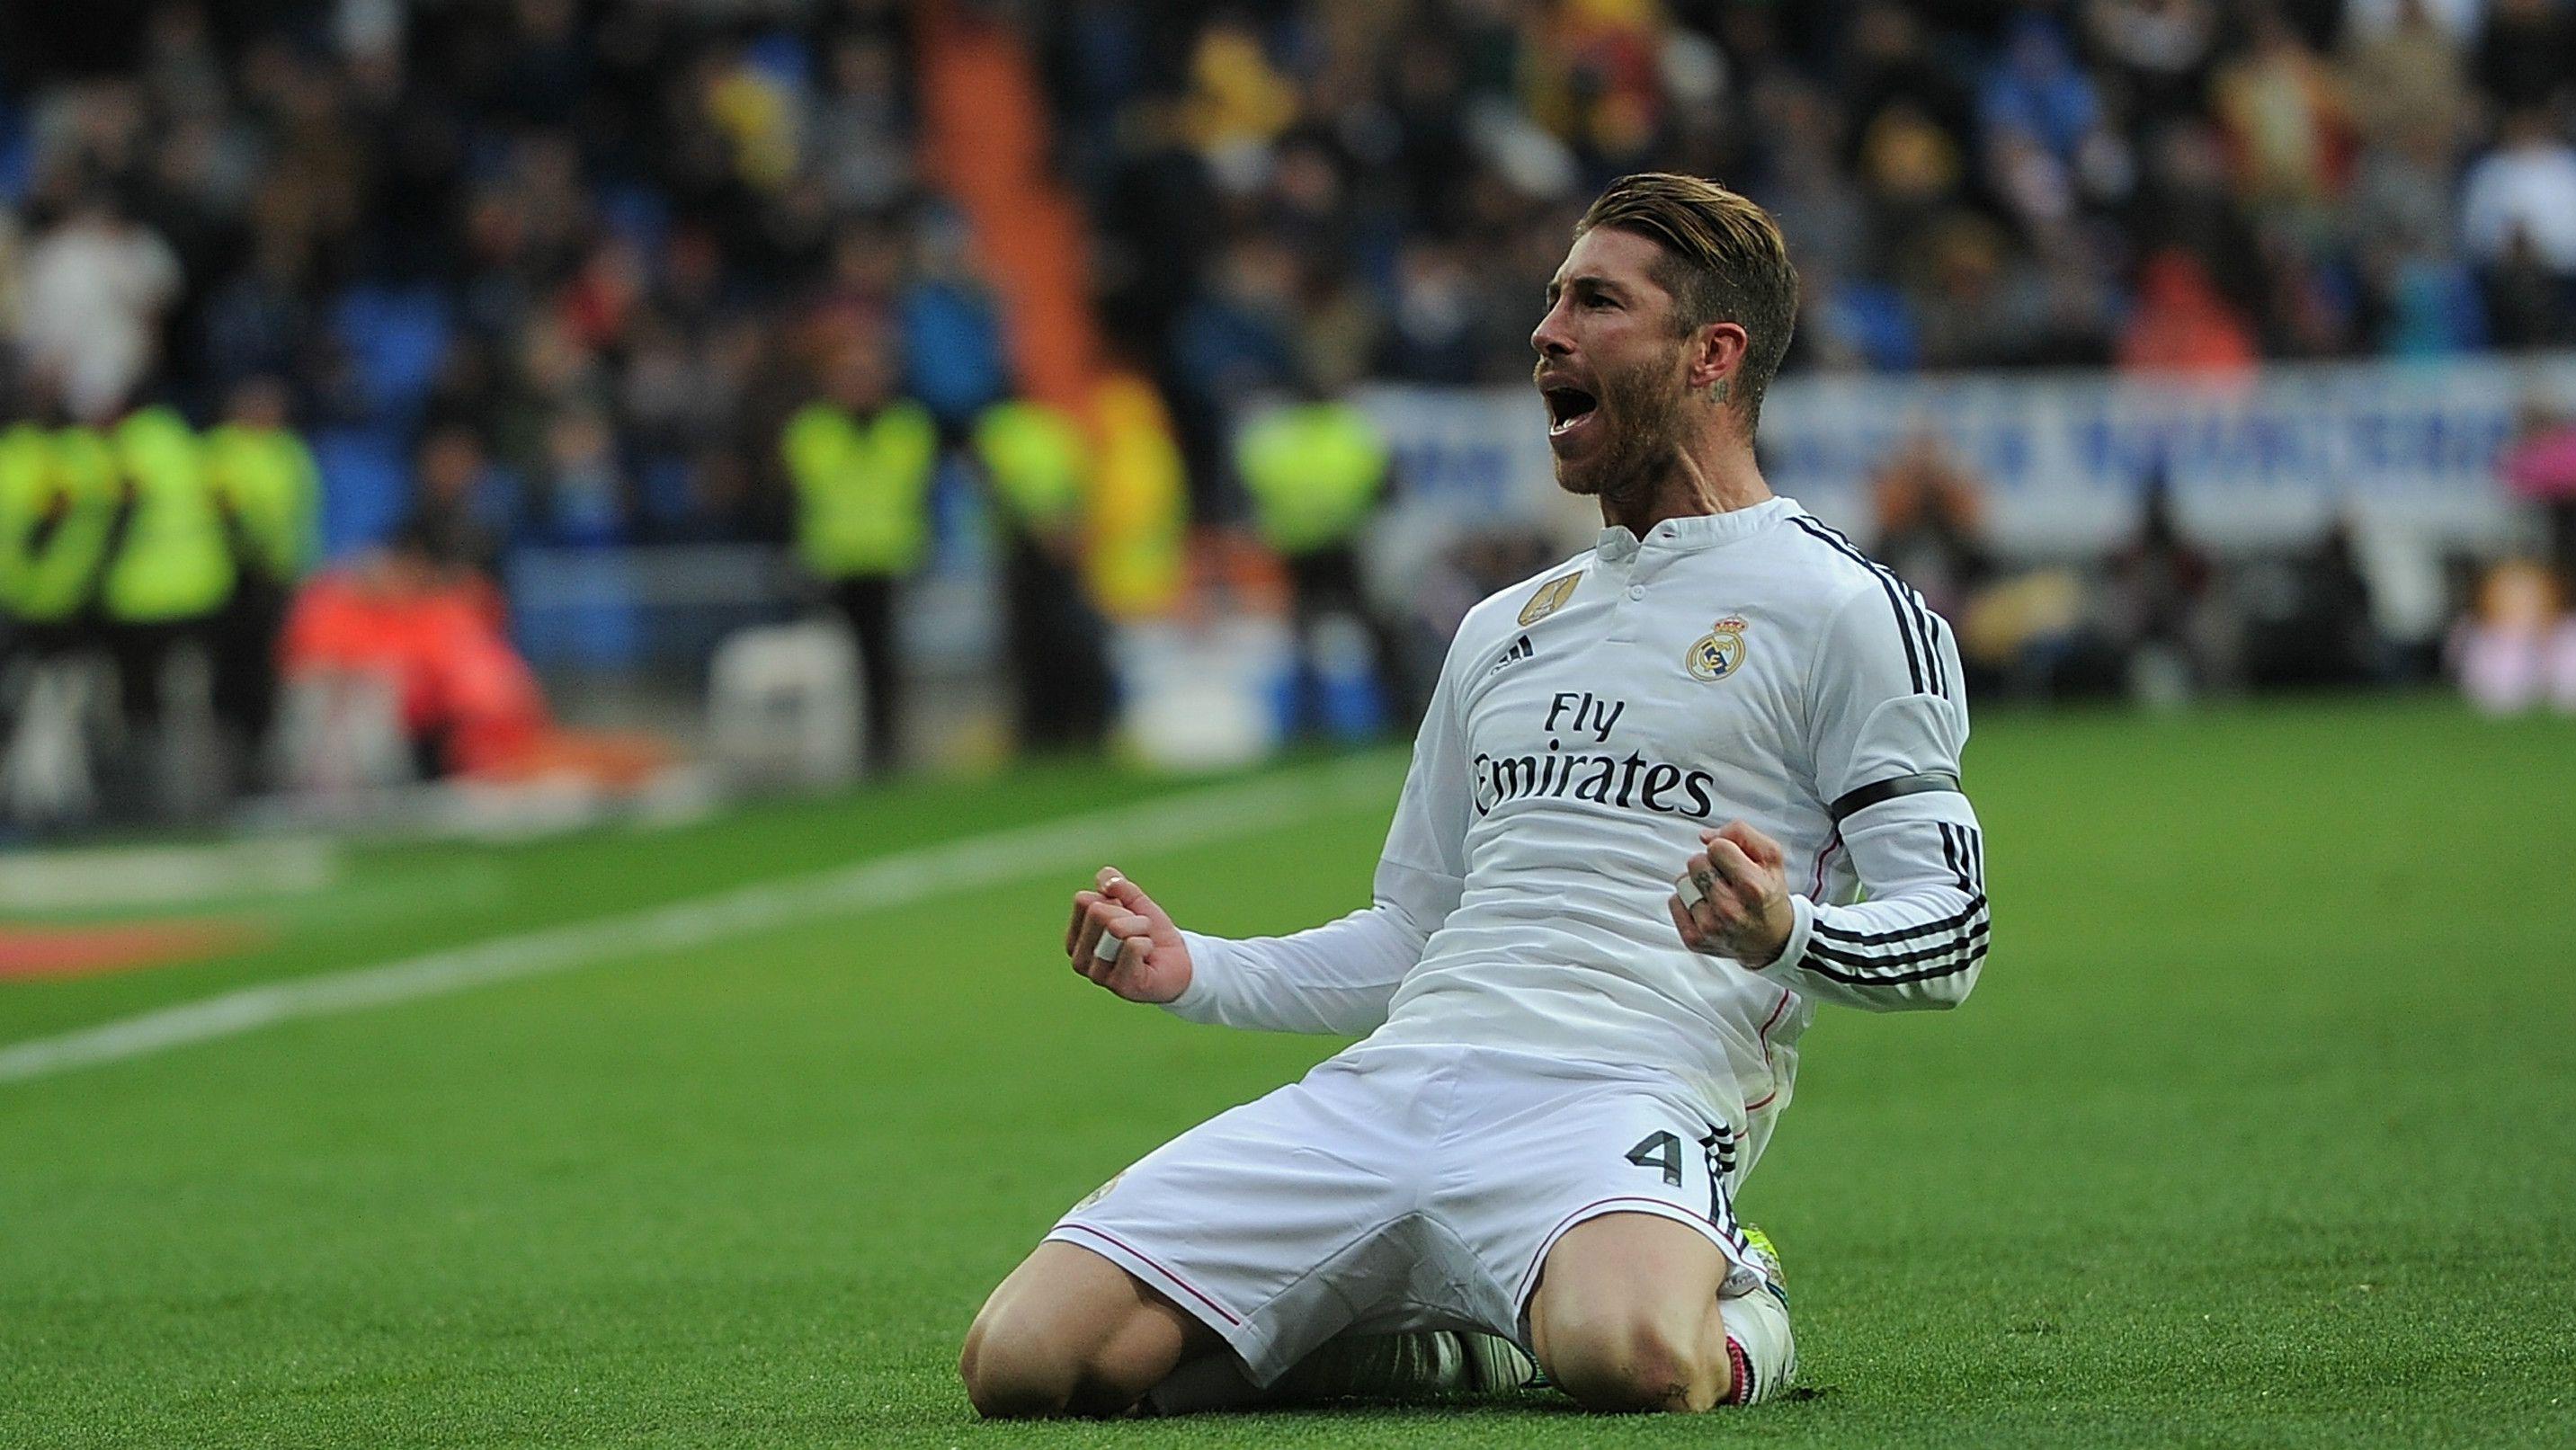 Sergio Ramos Wallpaper Image Photo Picture Background